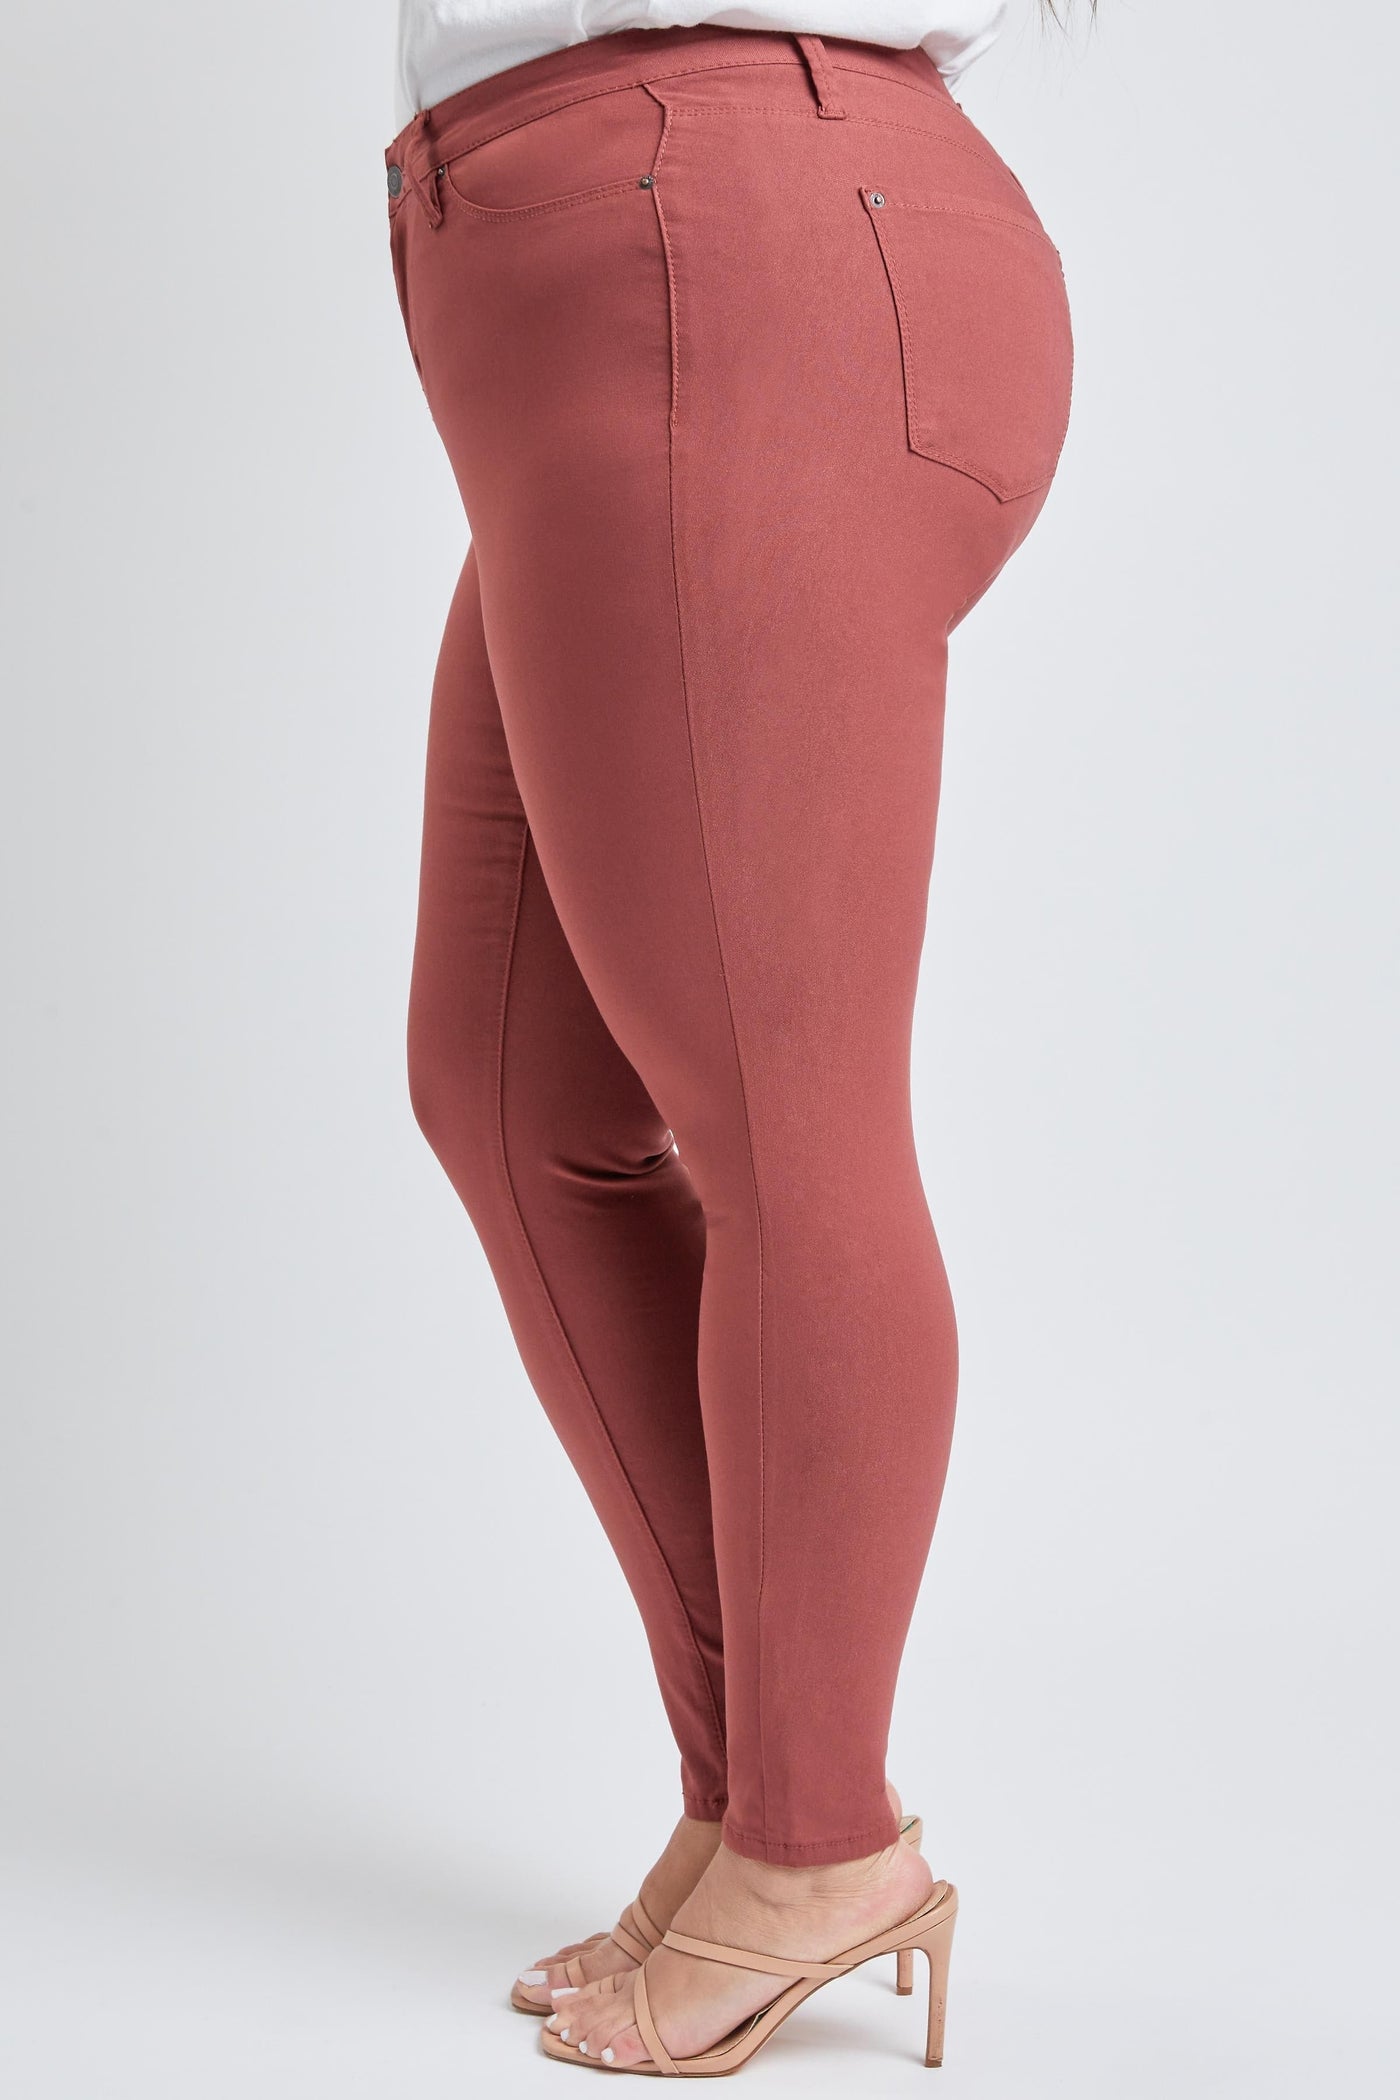 Women's Plus Size Hyperstretch Forever Color Skinny Pants - Warm Tones